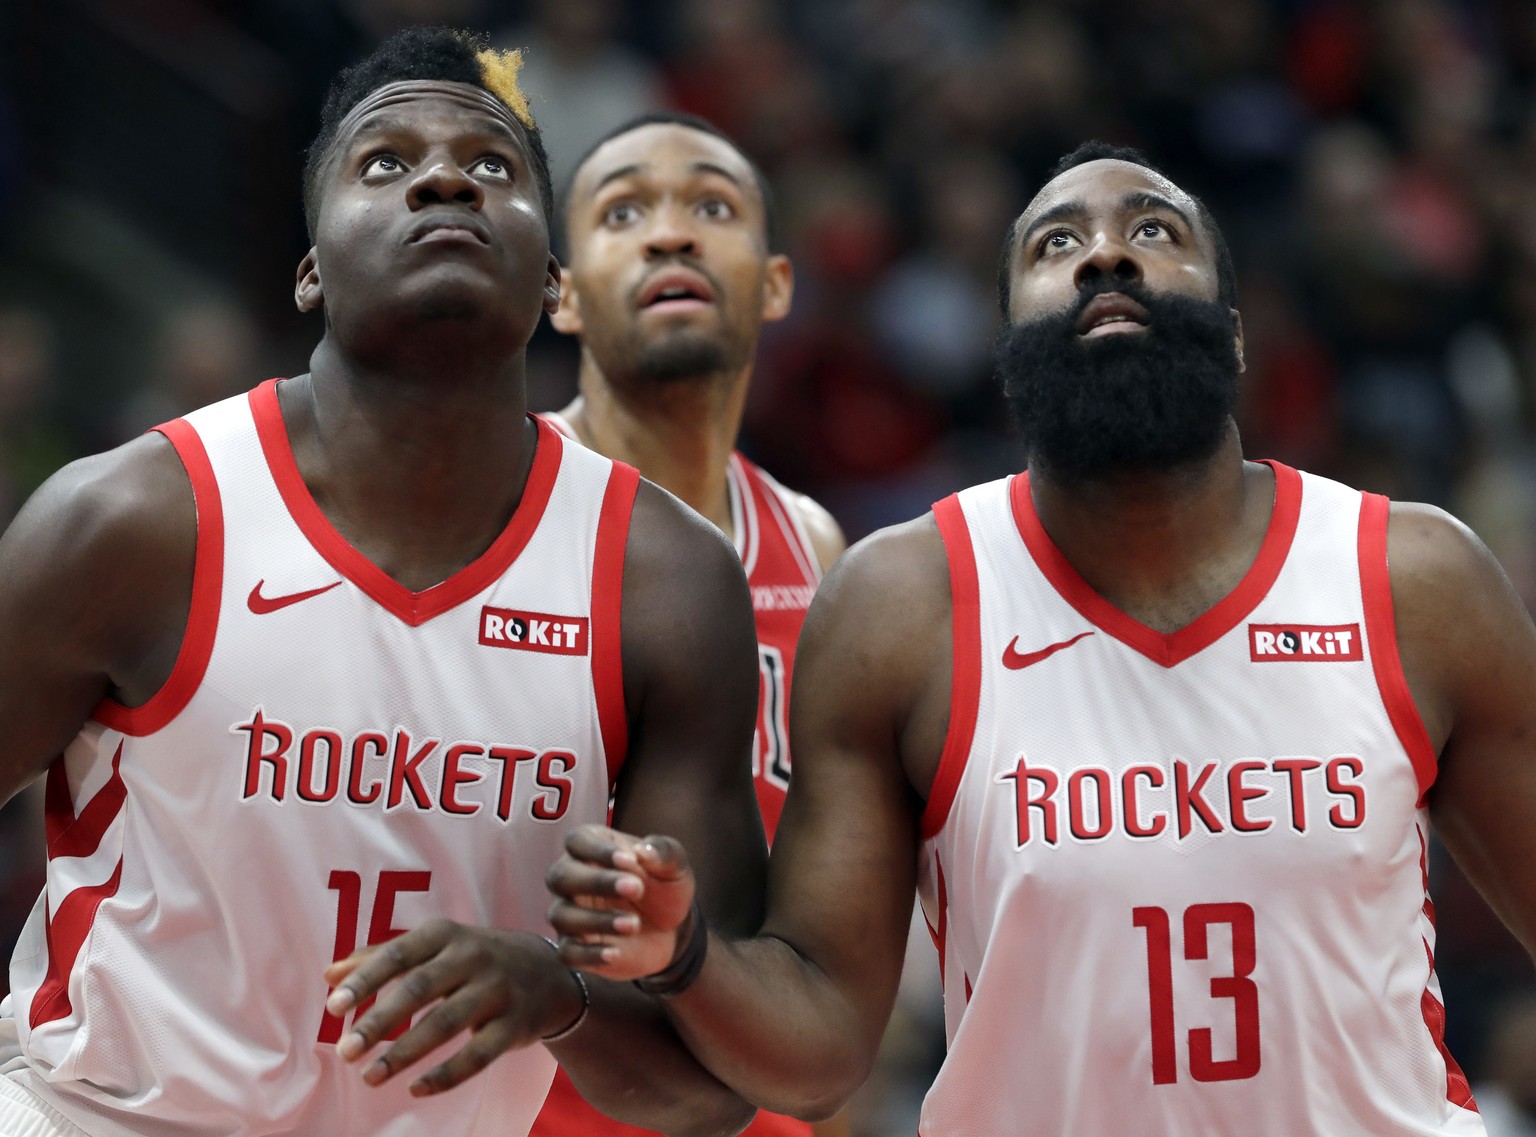 Houston Rockets center Clint Capela, left, and guard James Harden watch the ball during the second half of an NBA basketball game against the Chicago Bulls, Saturday, Nov. 3, 2018, in Chicago. (AP Pho ...